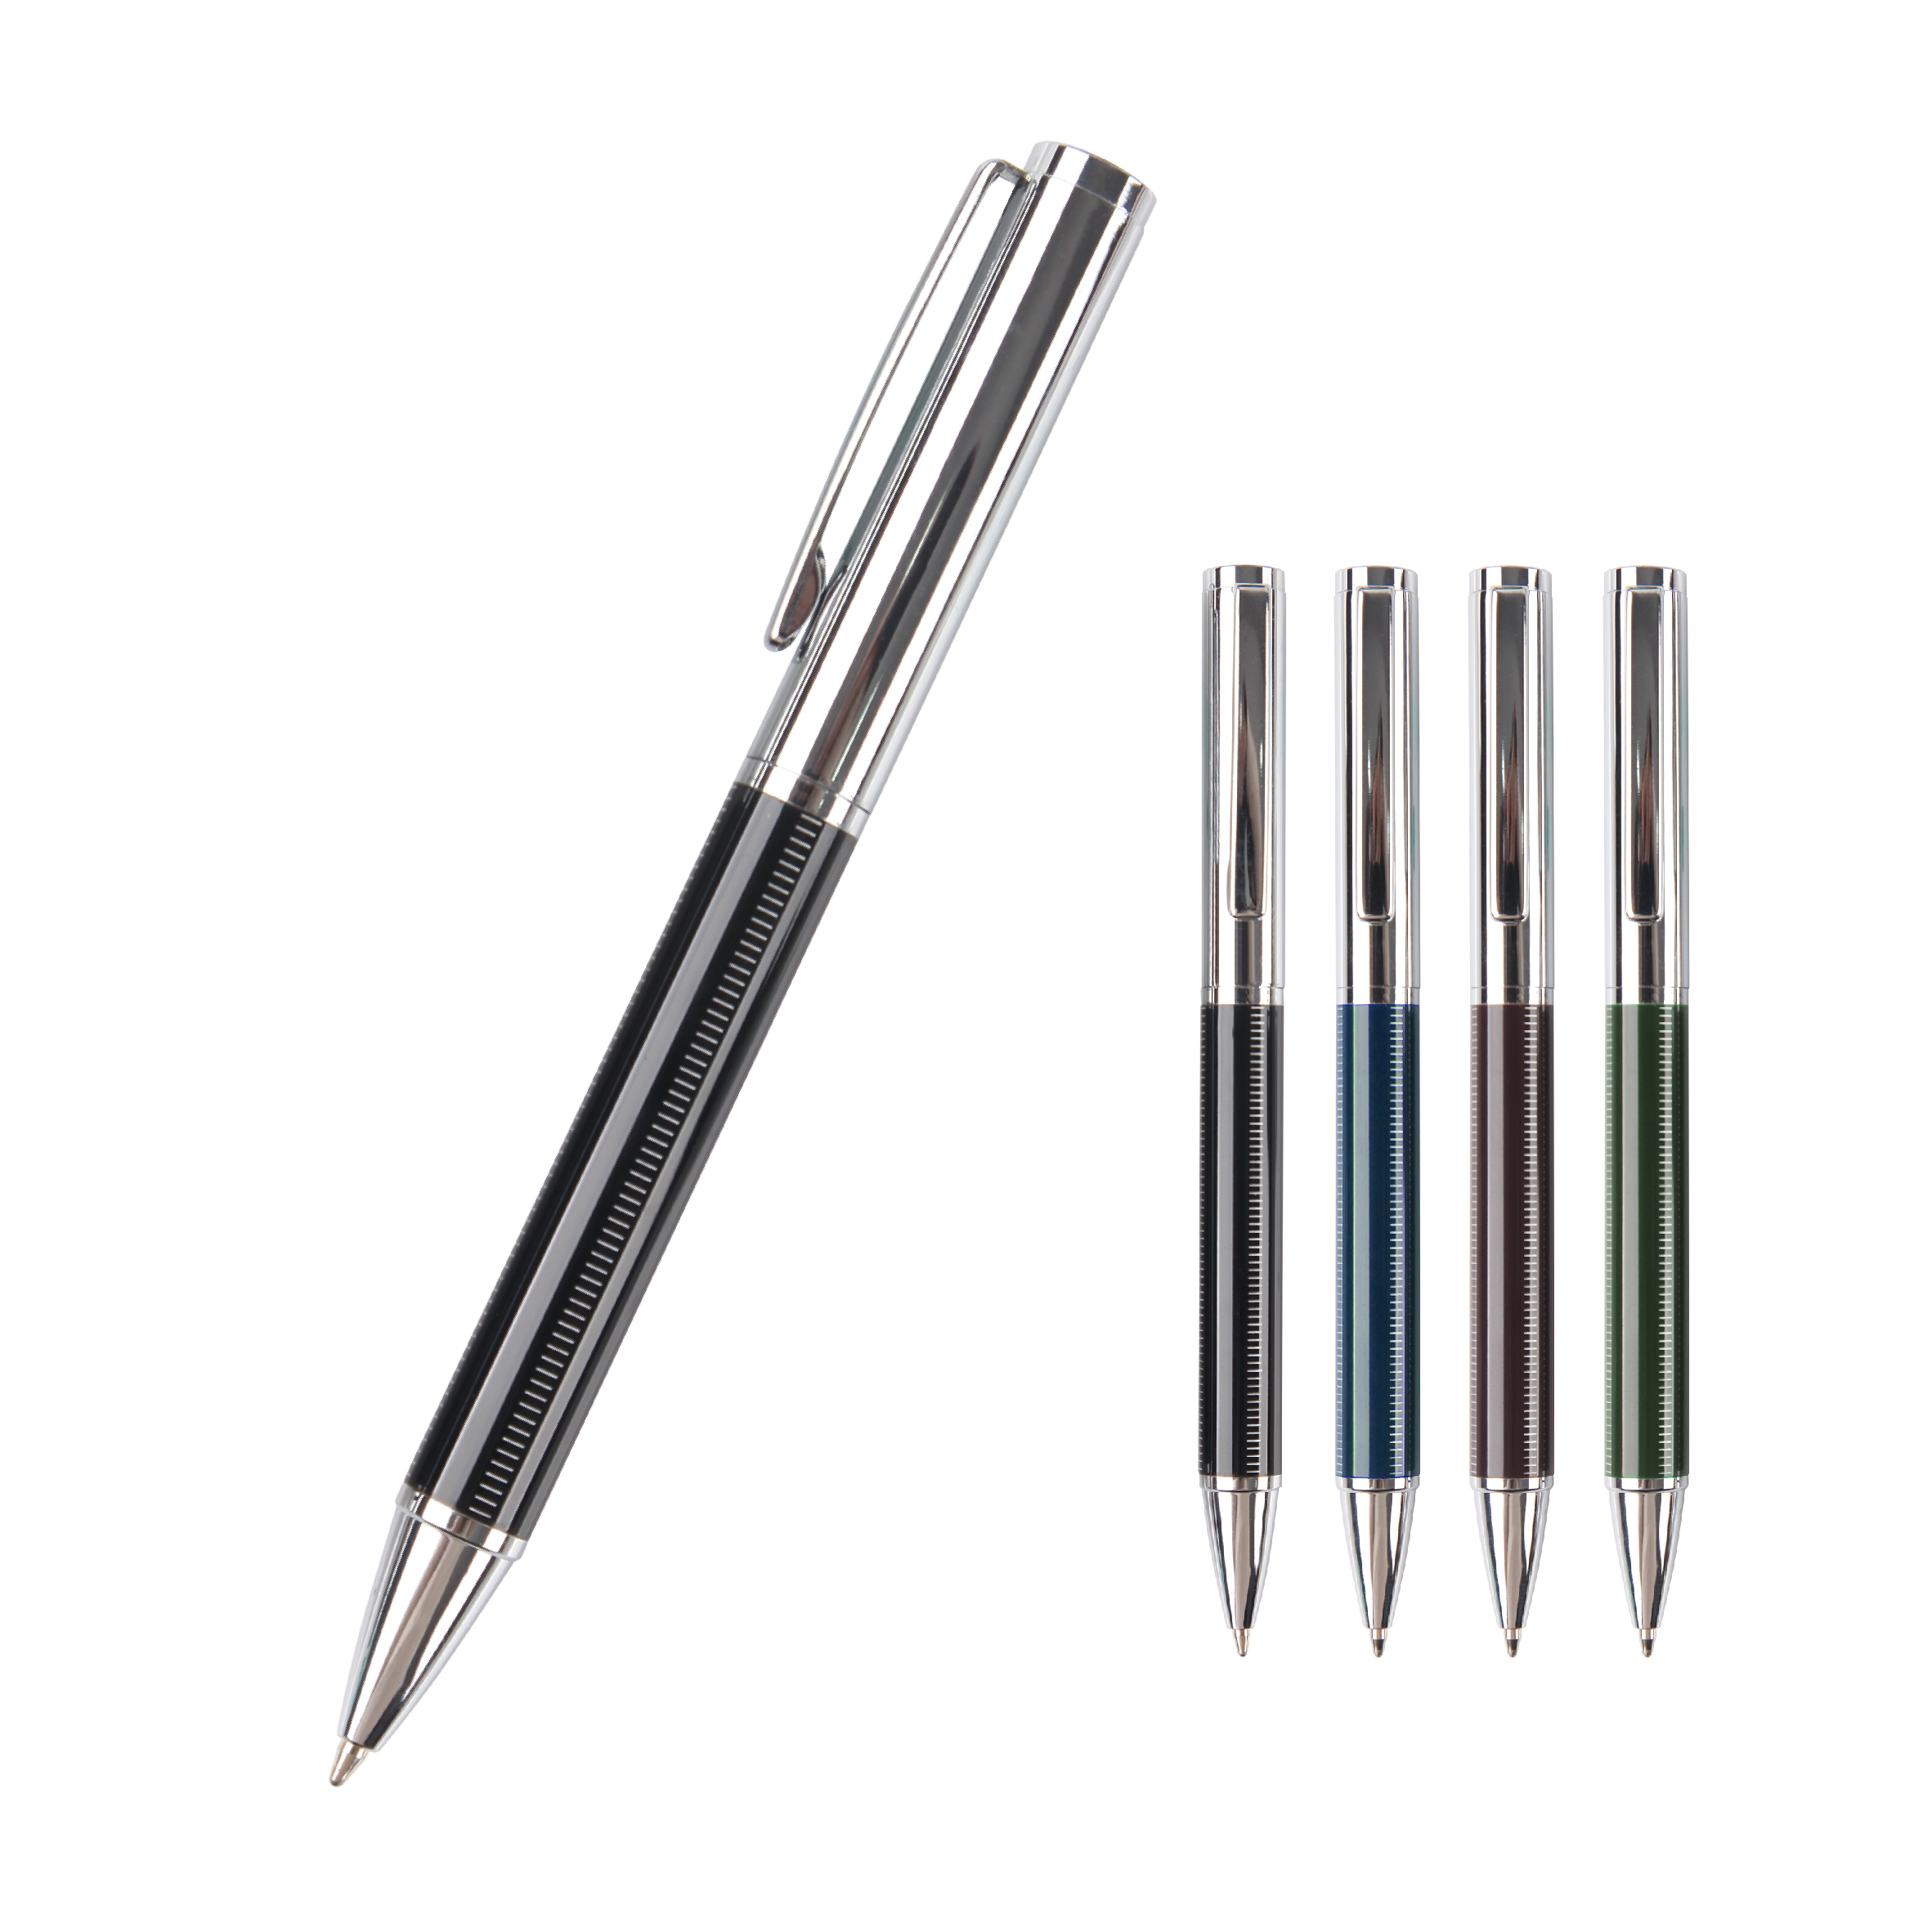 Twistable High quality Metal Ball Pen Retractable 1.0mm/0.7mm